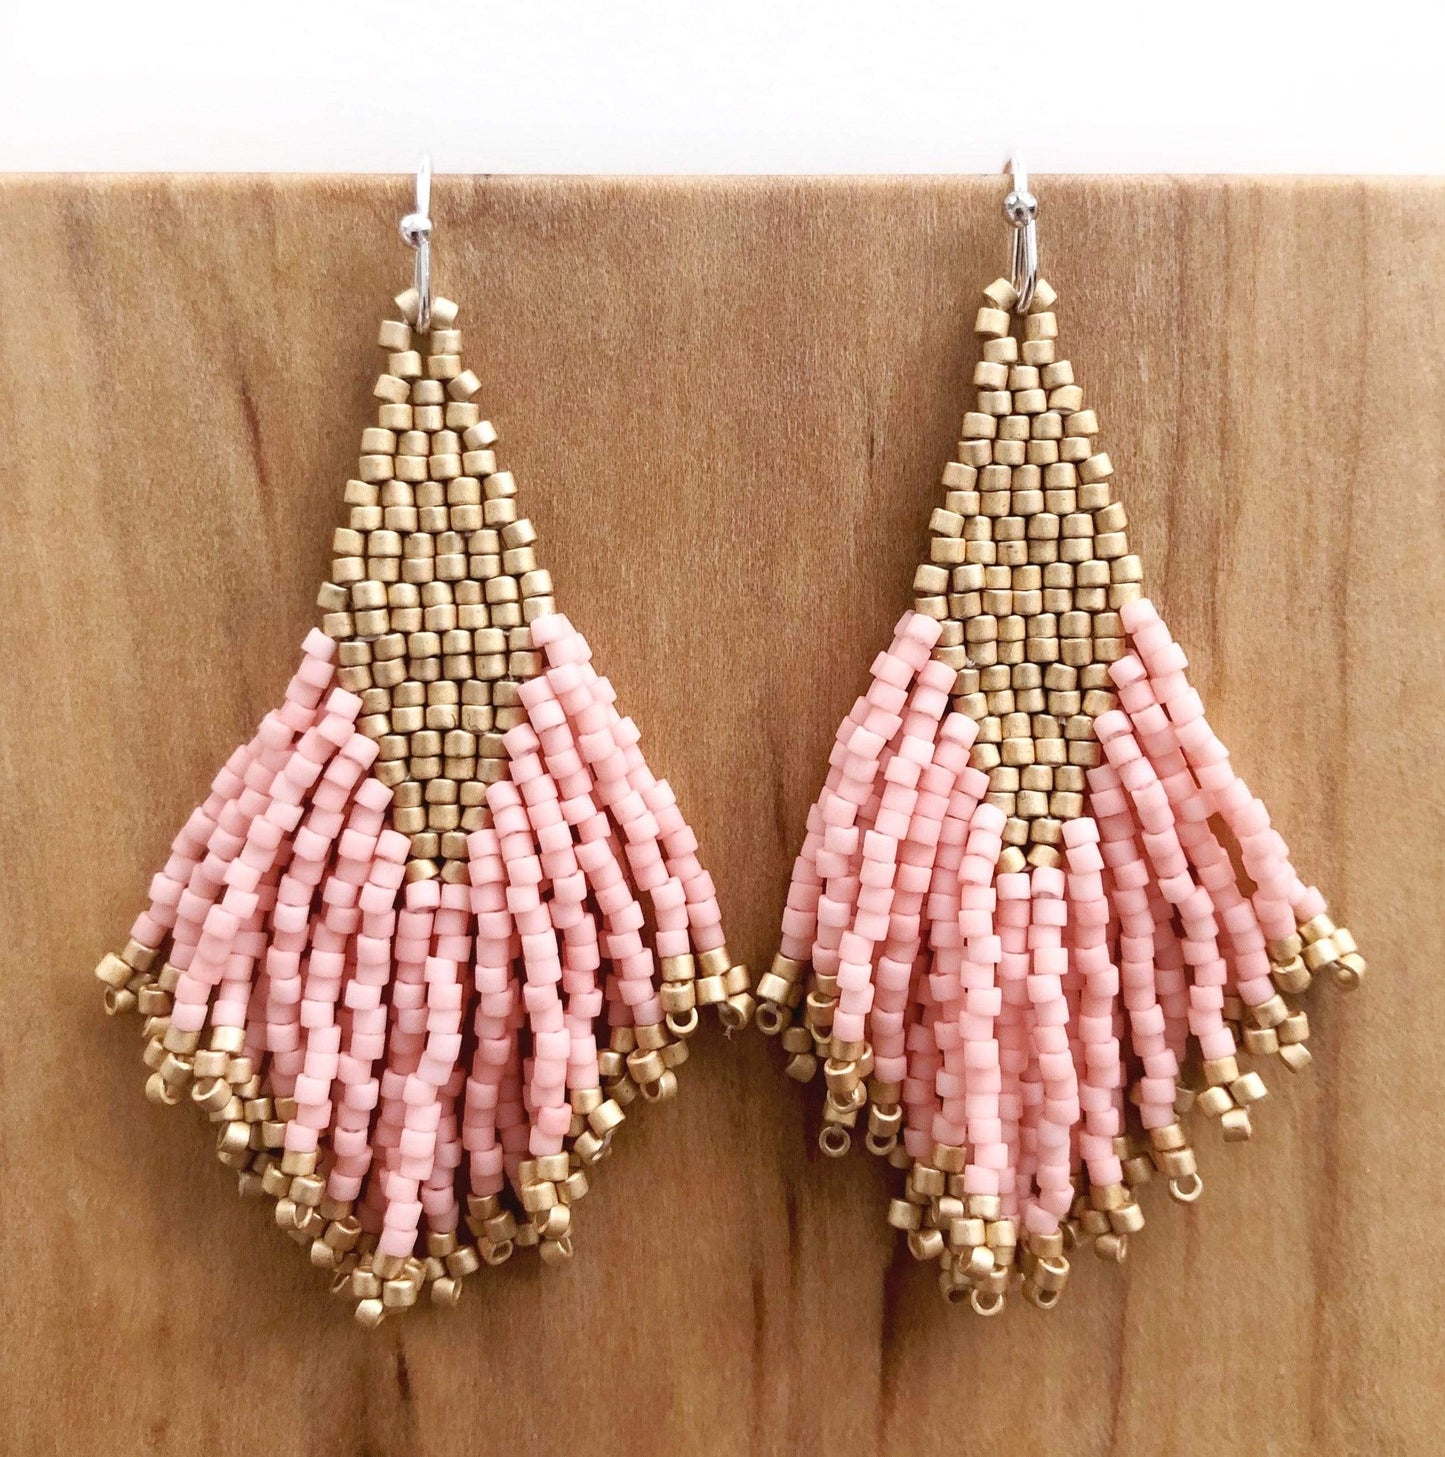 Load image into Gallery viewer, Lillie Nell Sokko Hasimbish Earrings in Blush
